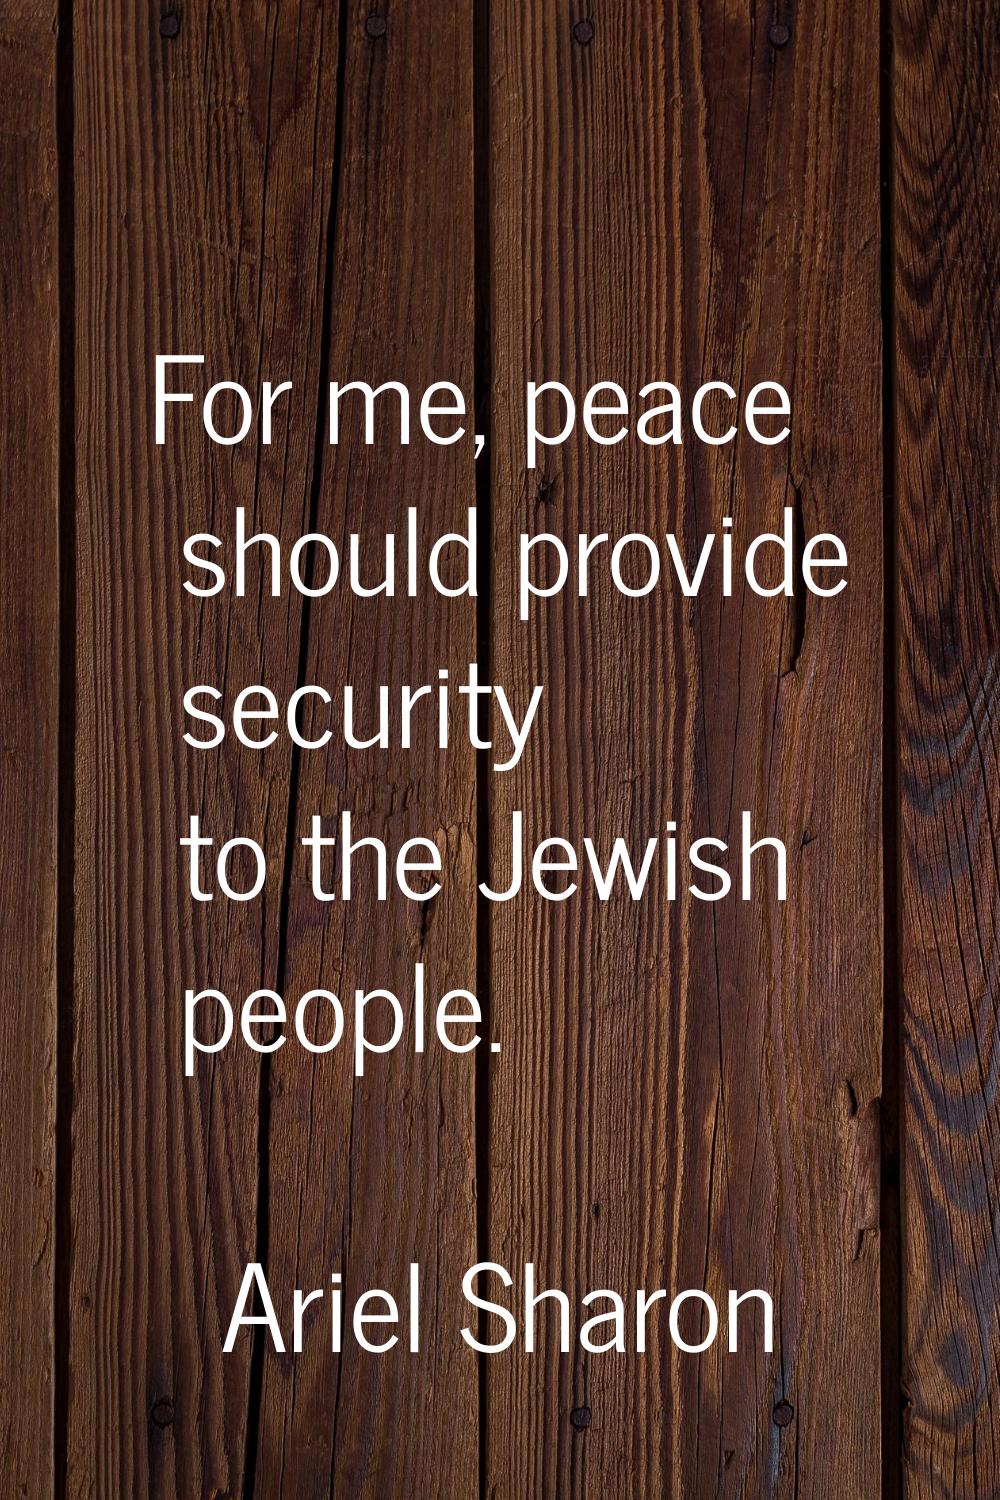 For me, peace should provide security to the Jewish people.